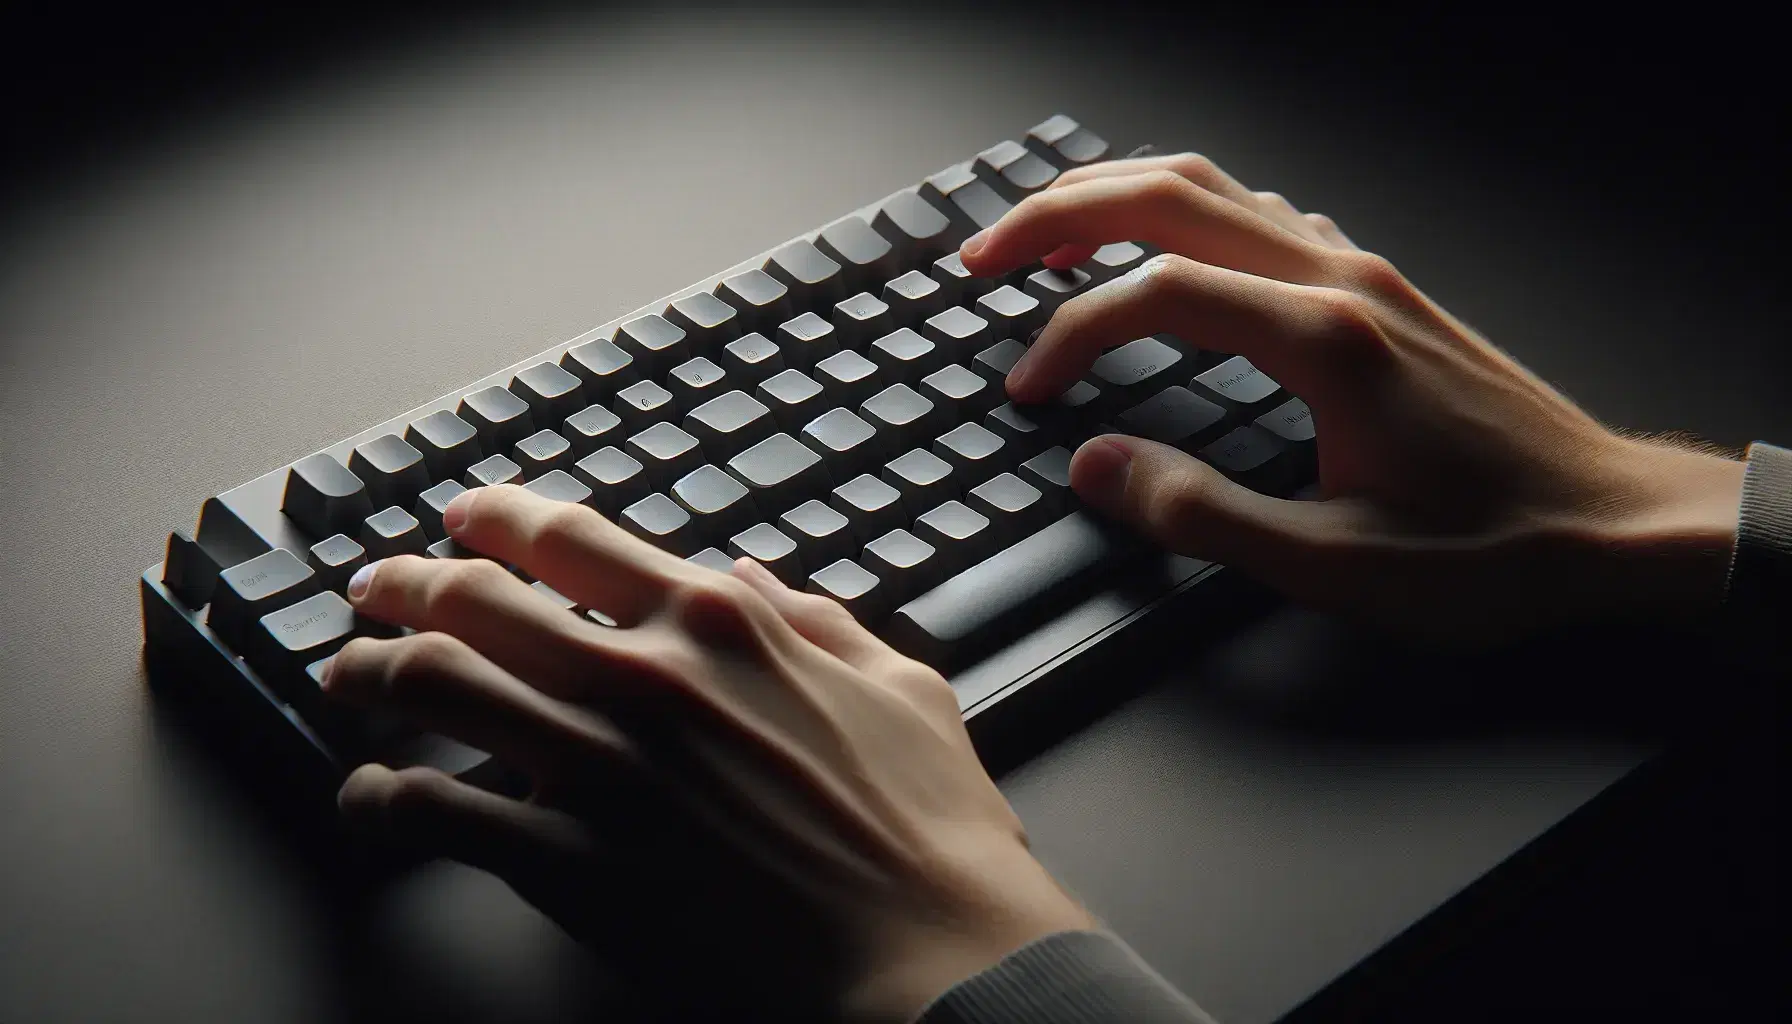 Close-up of hands typing on computer keyboard with no visible branding, gray keys on dark background, emphasis on human-machine interaction.